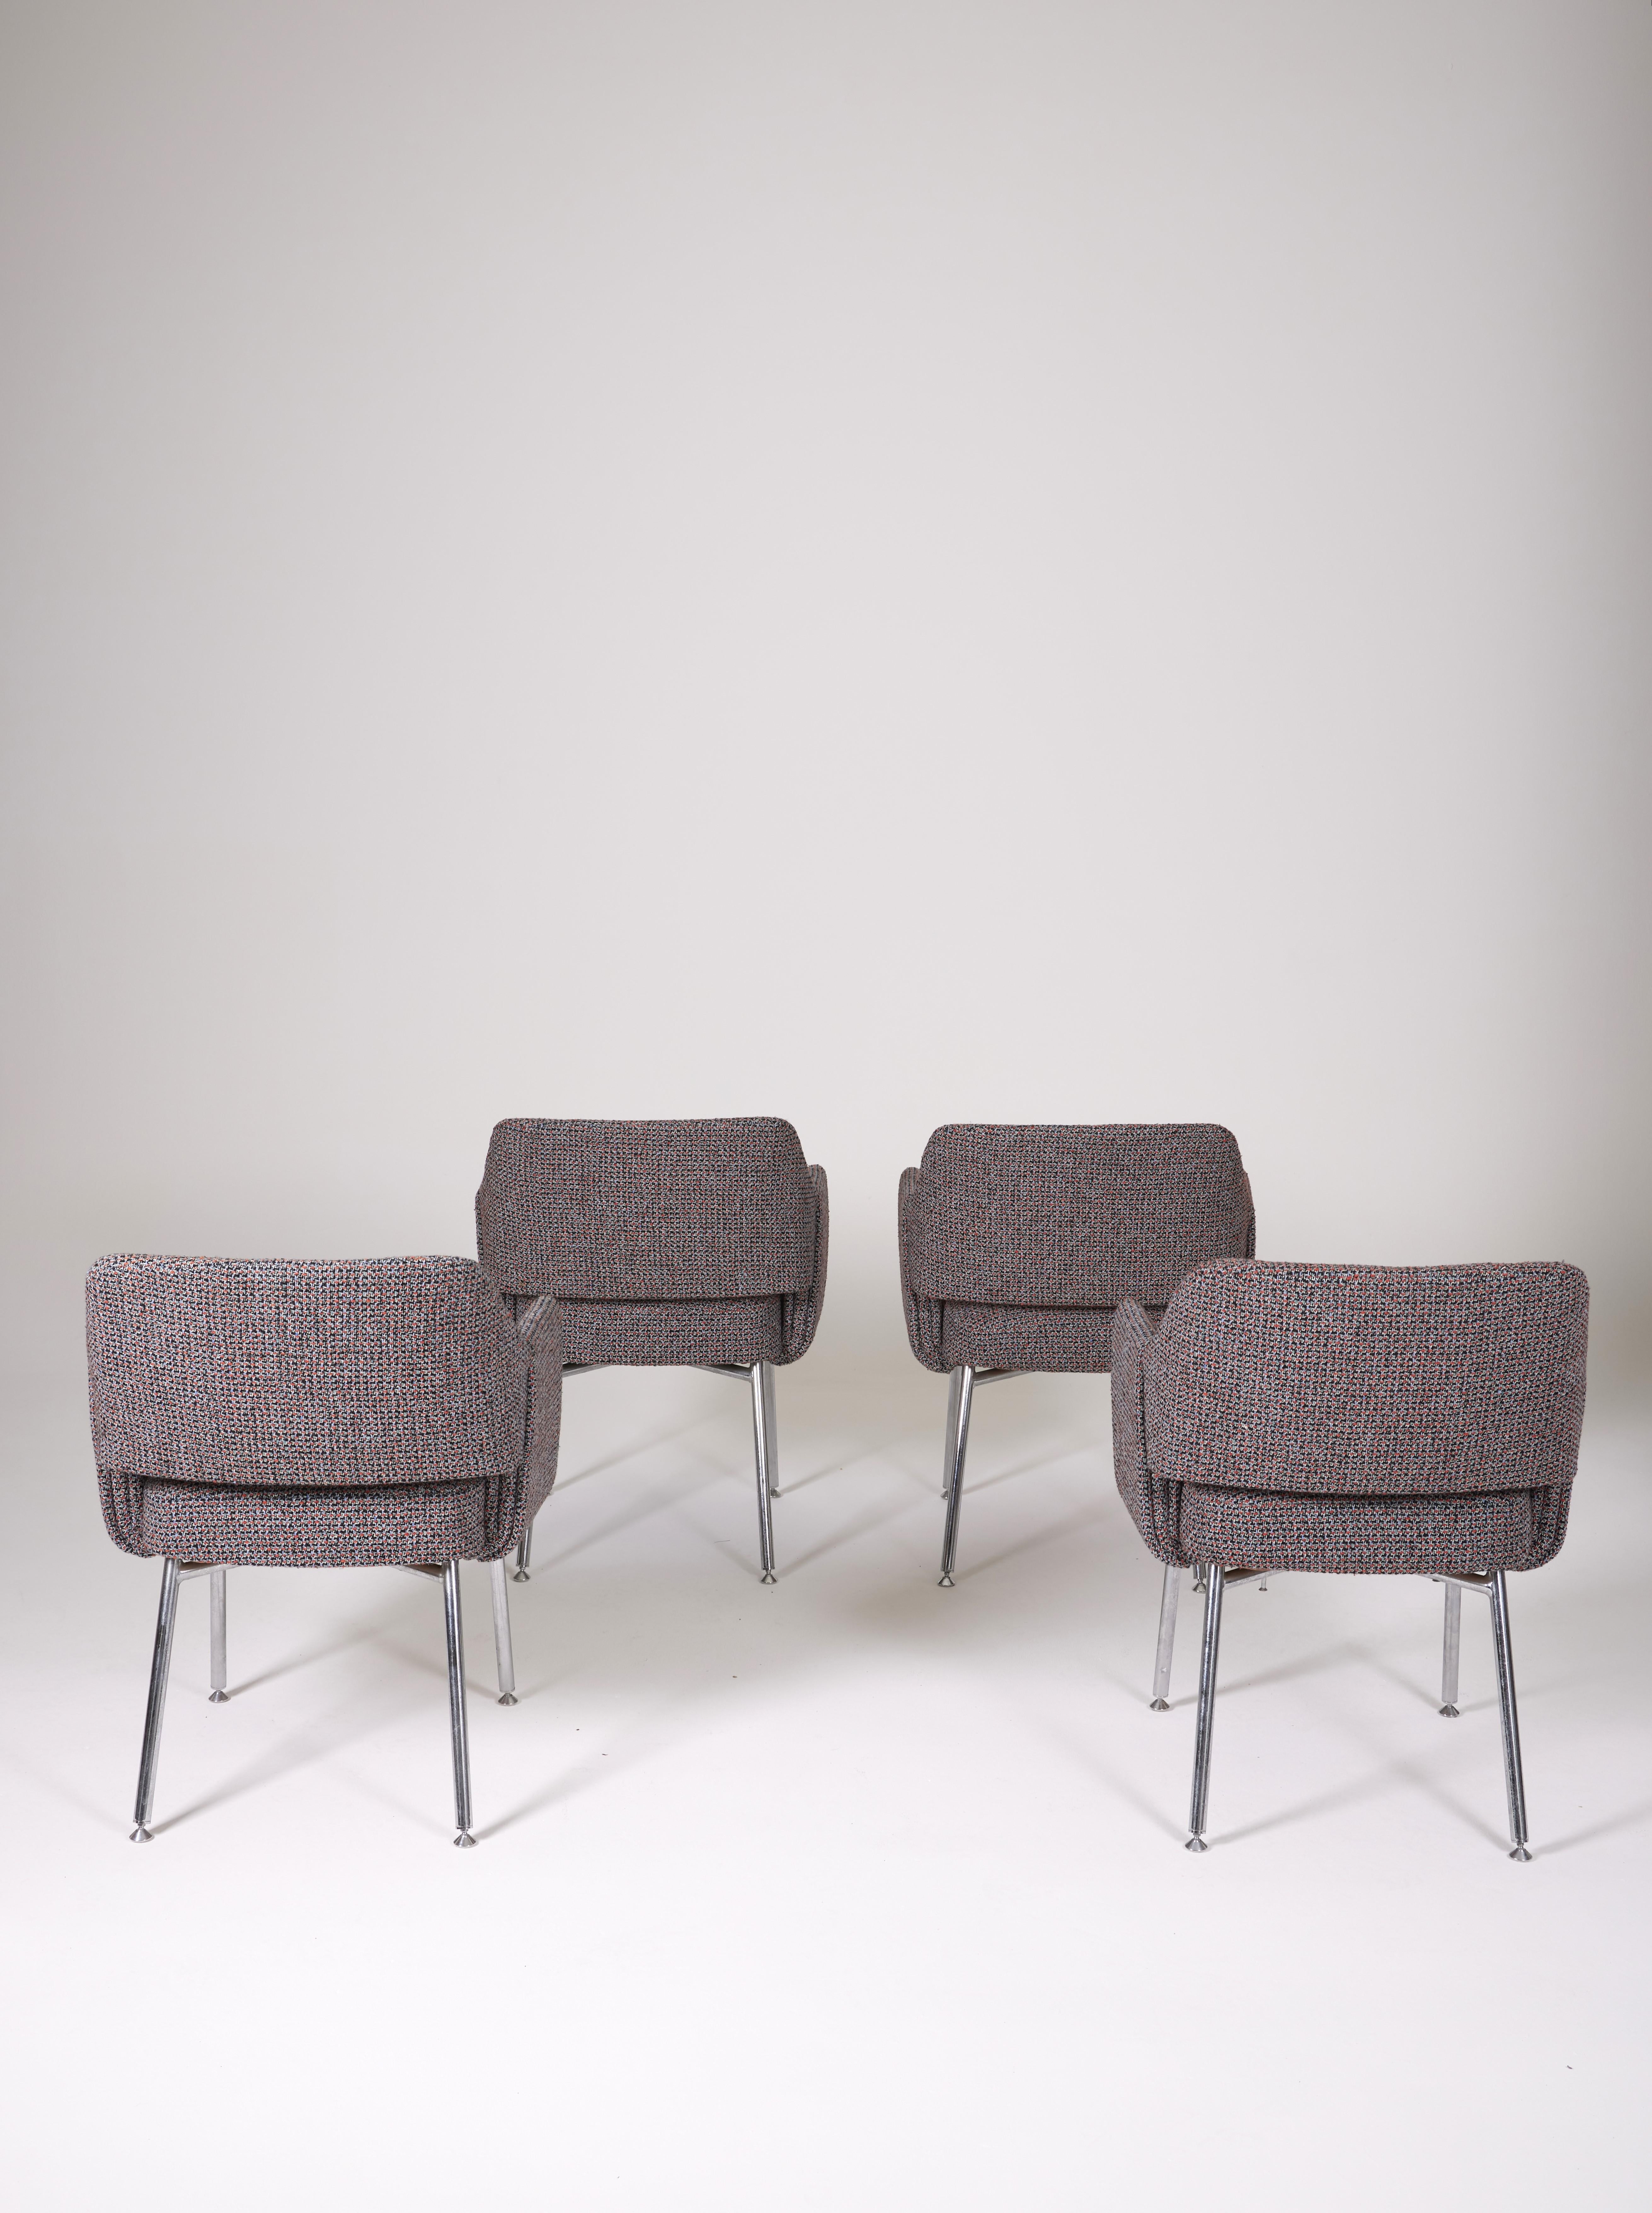 Deauville Airborne armchair in tweed For Sale 2